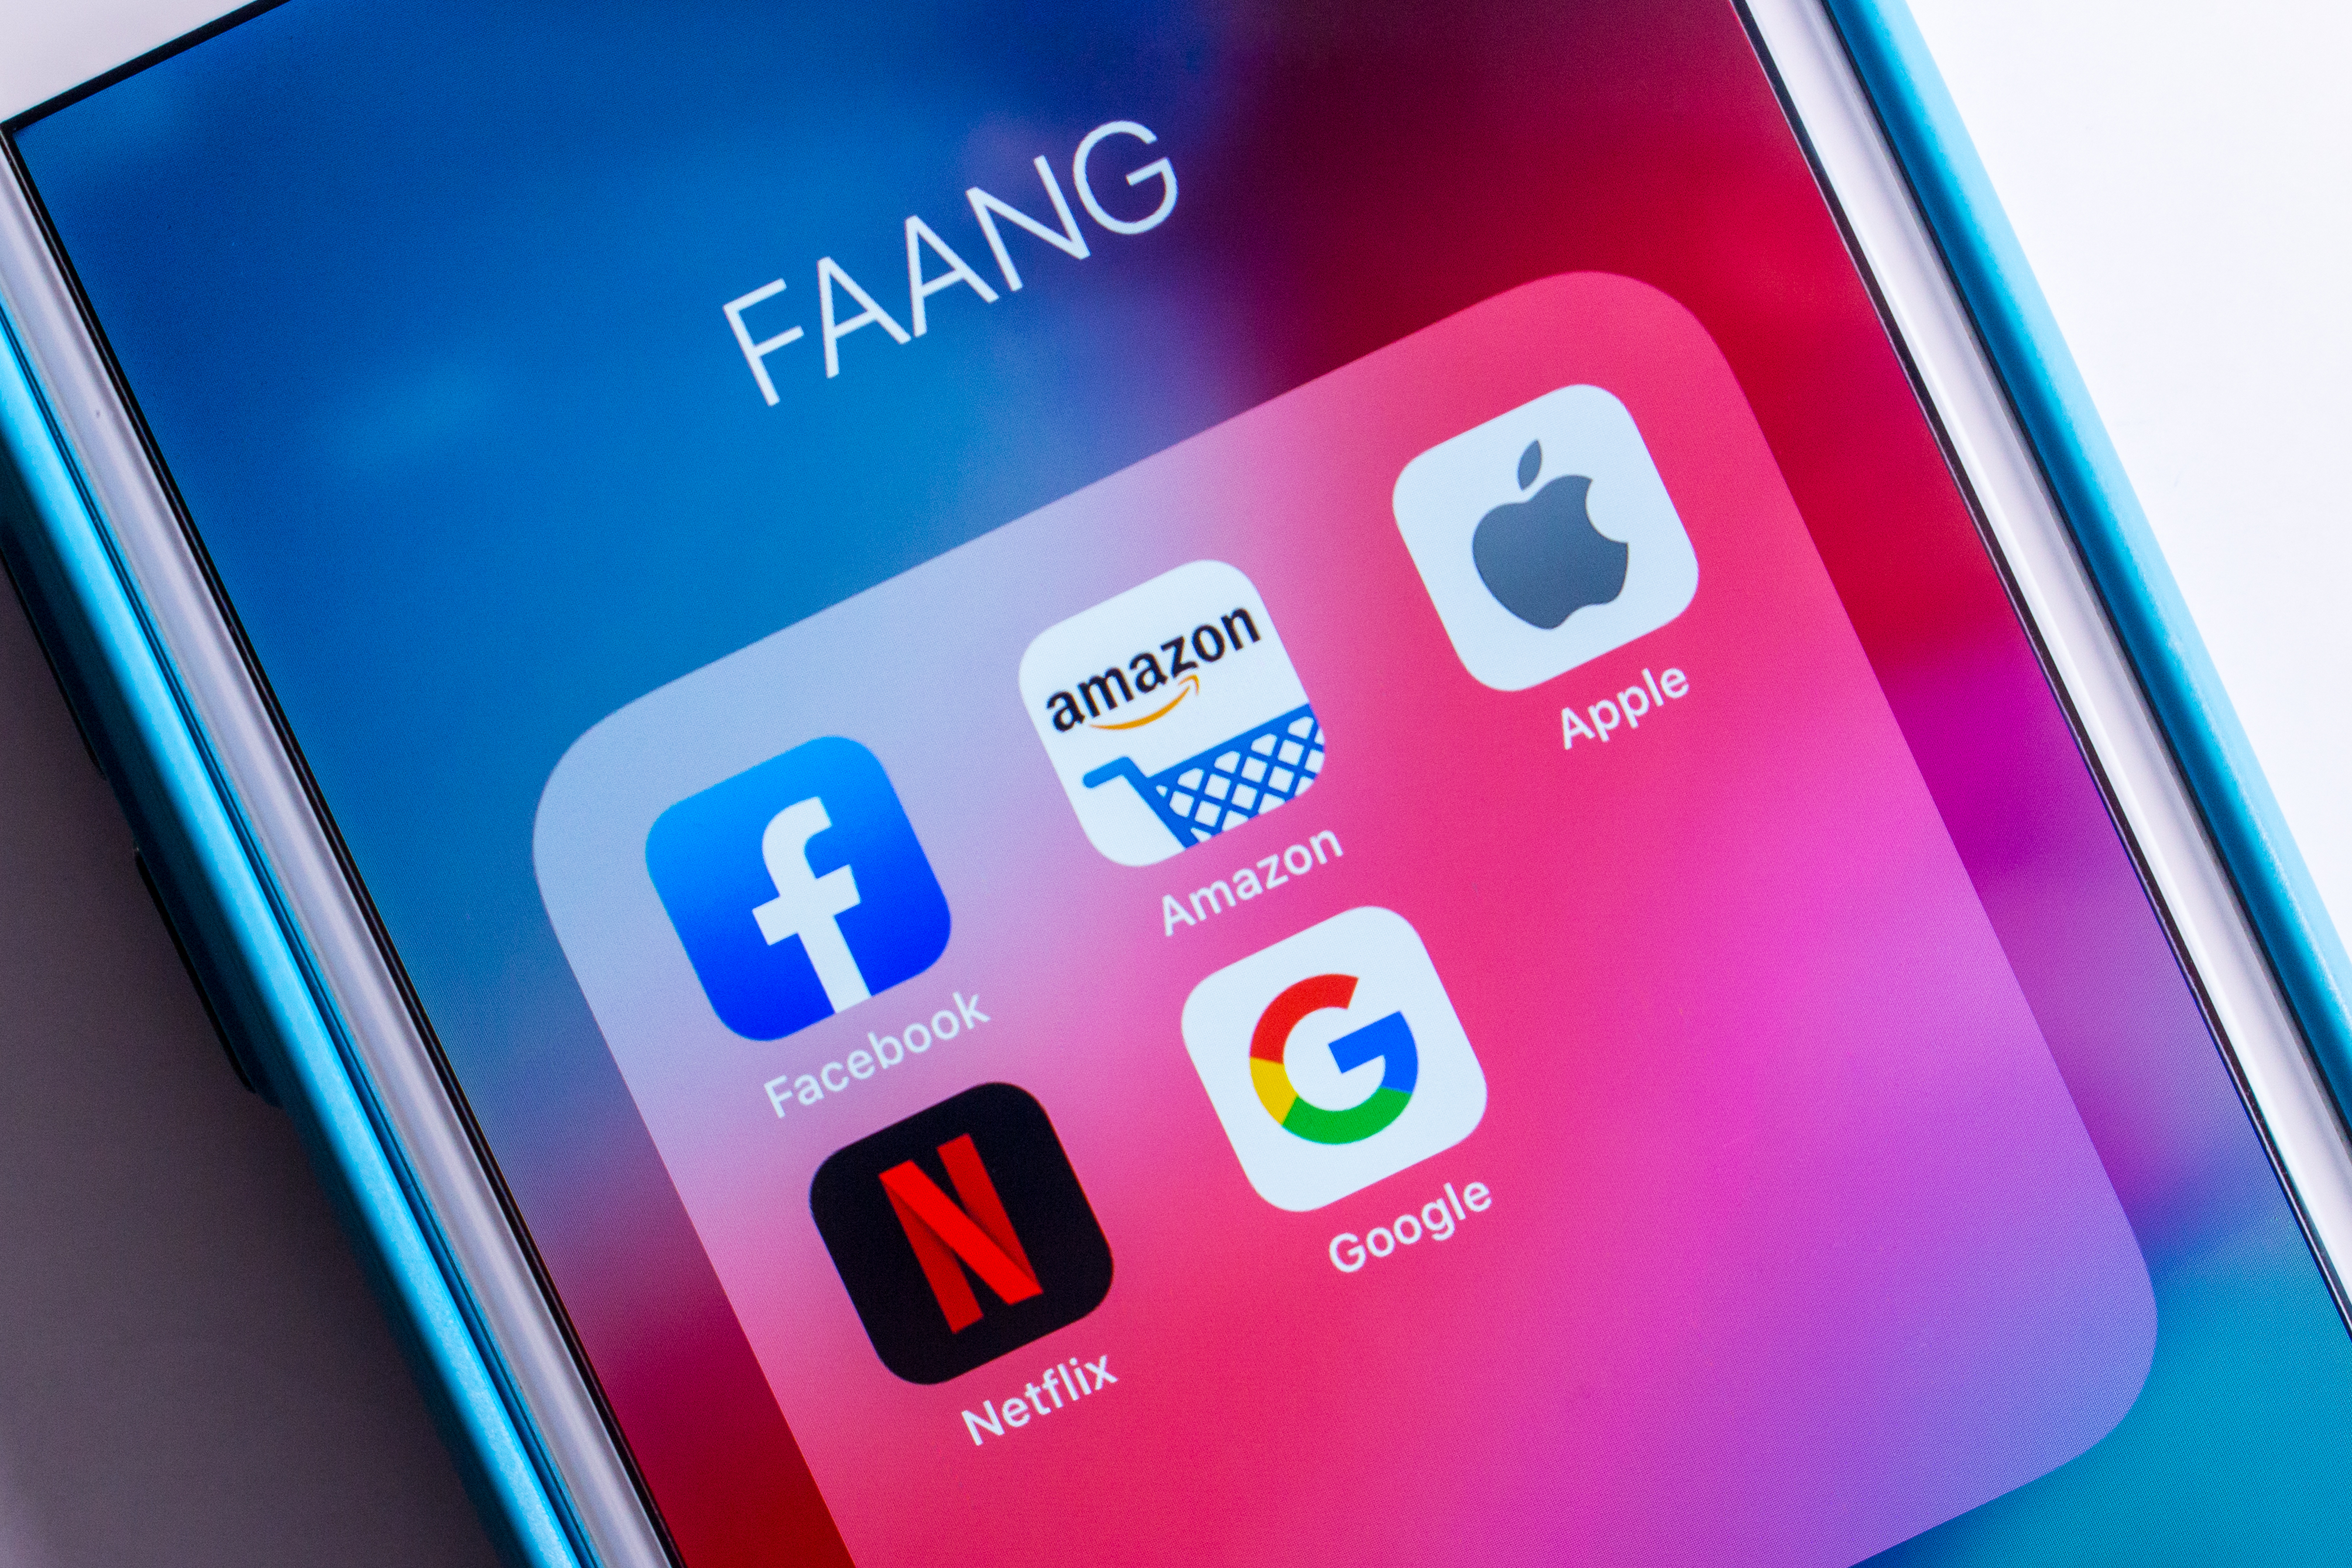 The Death of FAANG